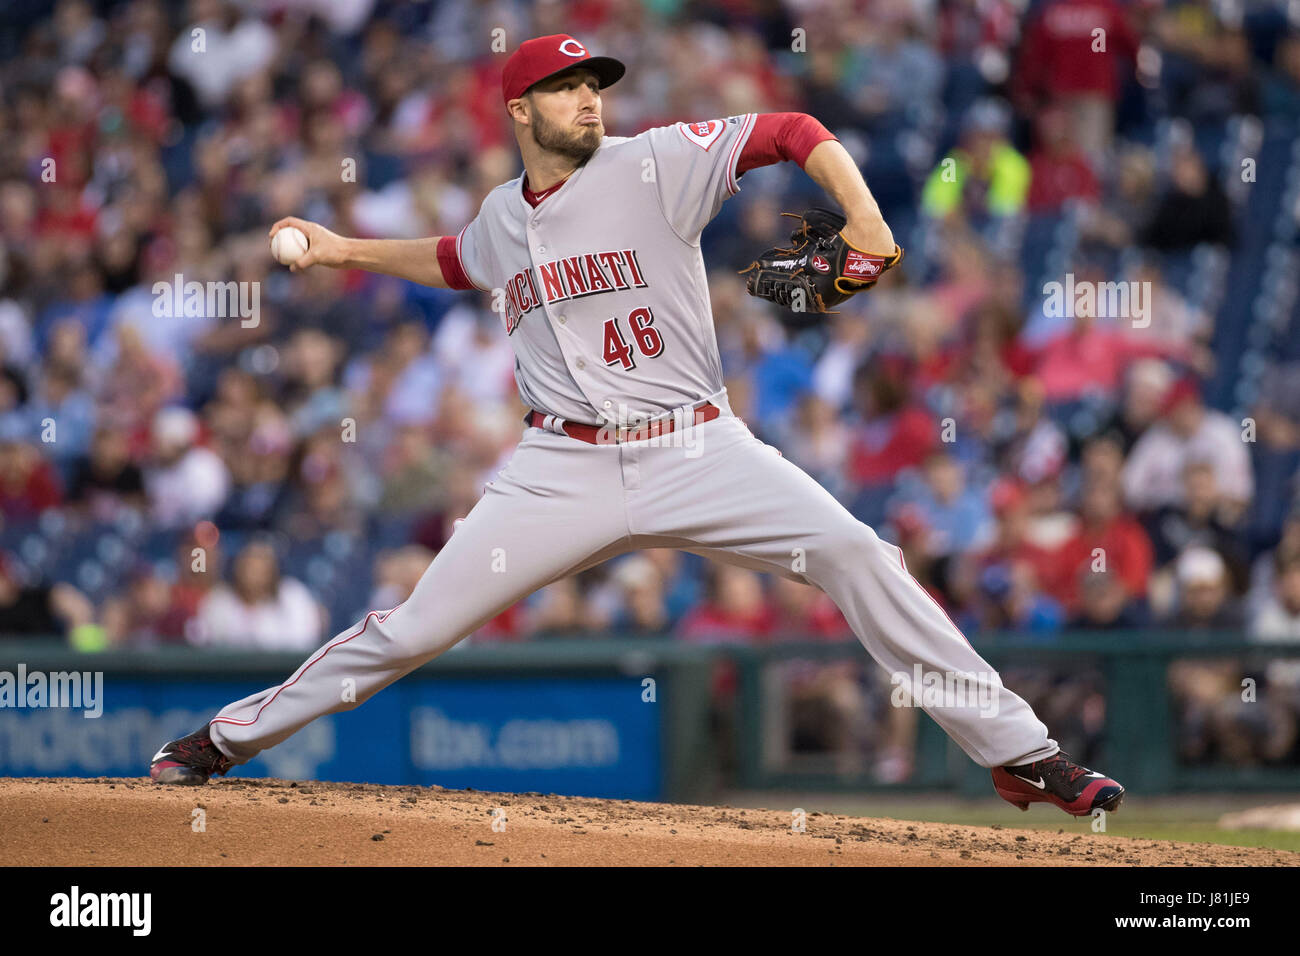 Philadelphia, Pennsylvania, USA. 26th May, 2017. Cincinnati Reds starting pitcher Tim Adleman (46) throws a pitch during the MLB game between the Cincinnati Reds and Philadelphia Phillies at Citizens Bank Park in Philadelphia, Pennsylvania. The Cincinnati Reds won 5-2. Christopher Szagola/CSM/Alamy Live News Stock Photo